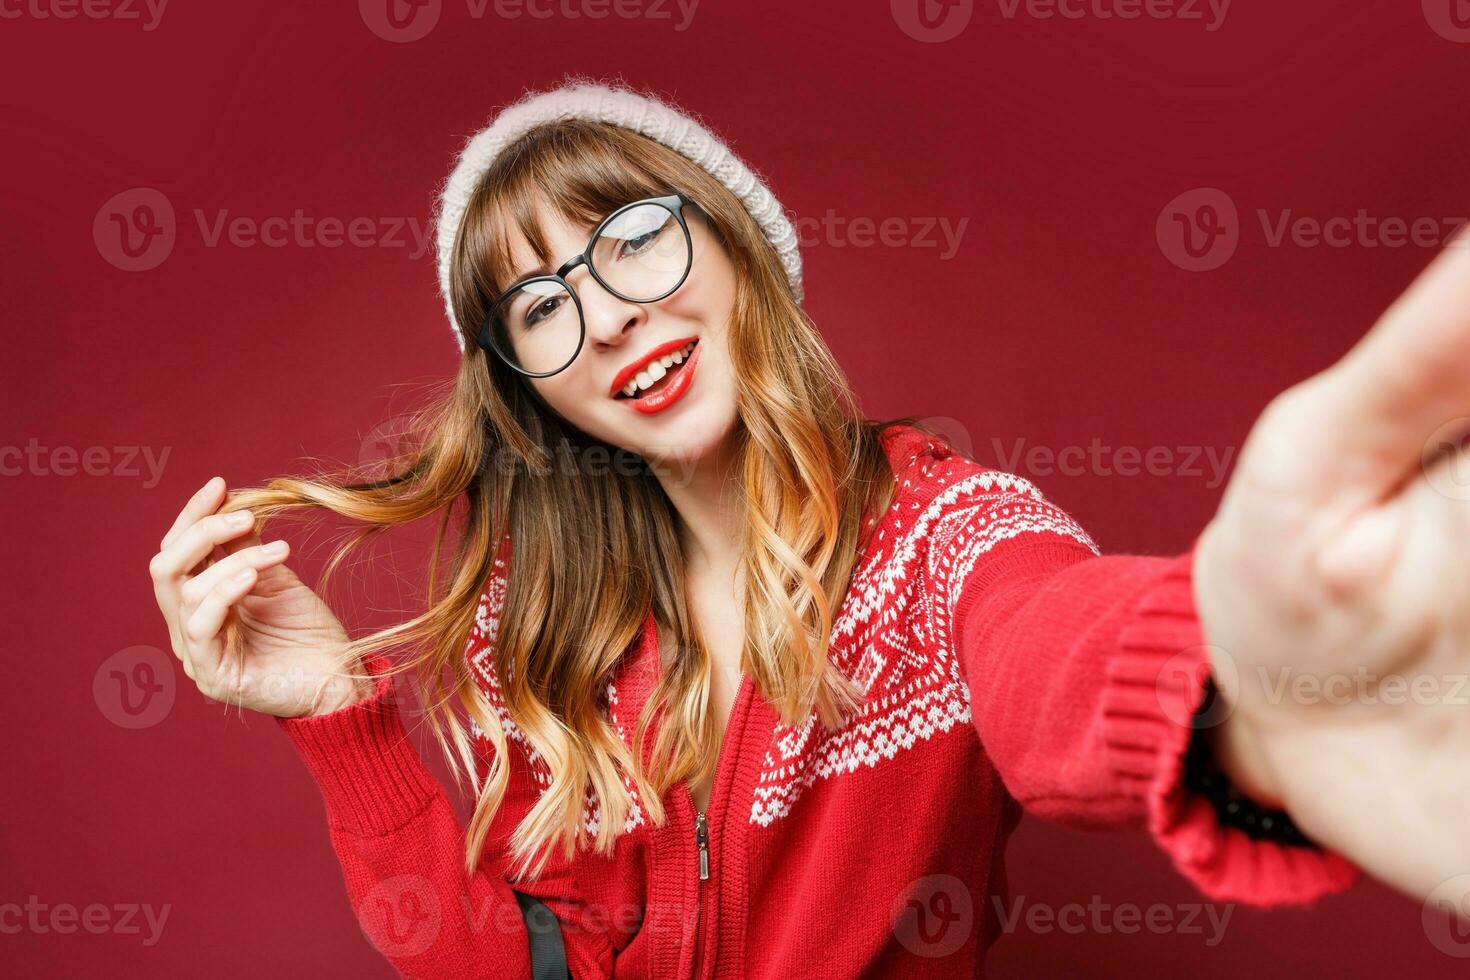 Smiling woman in winter outfit posing in studio on red background. photo